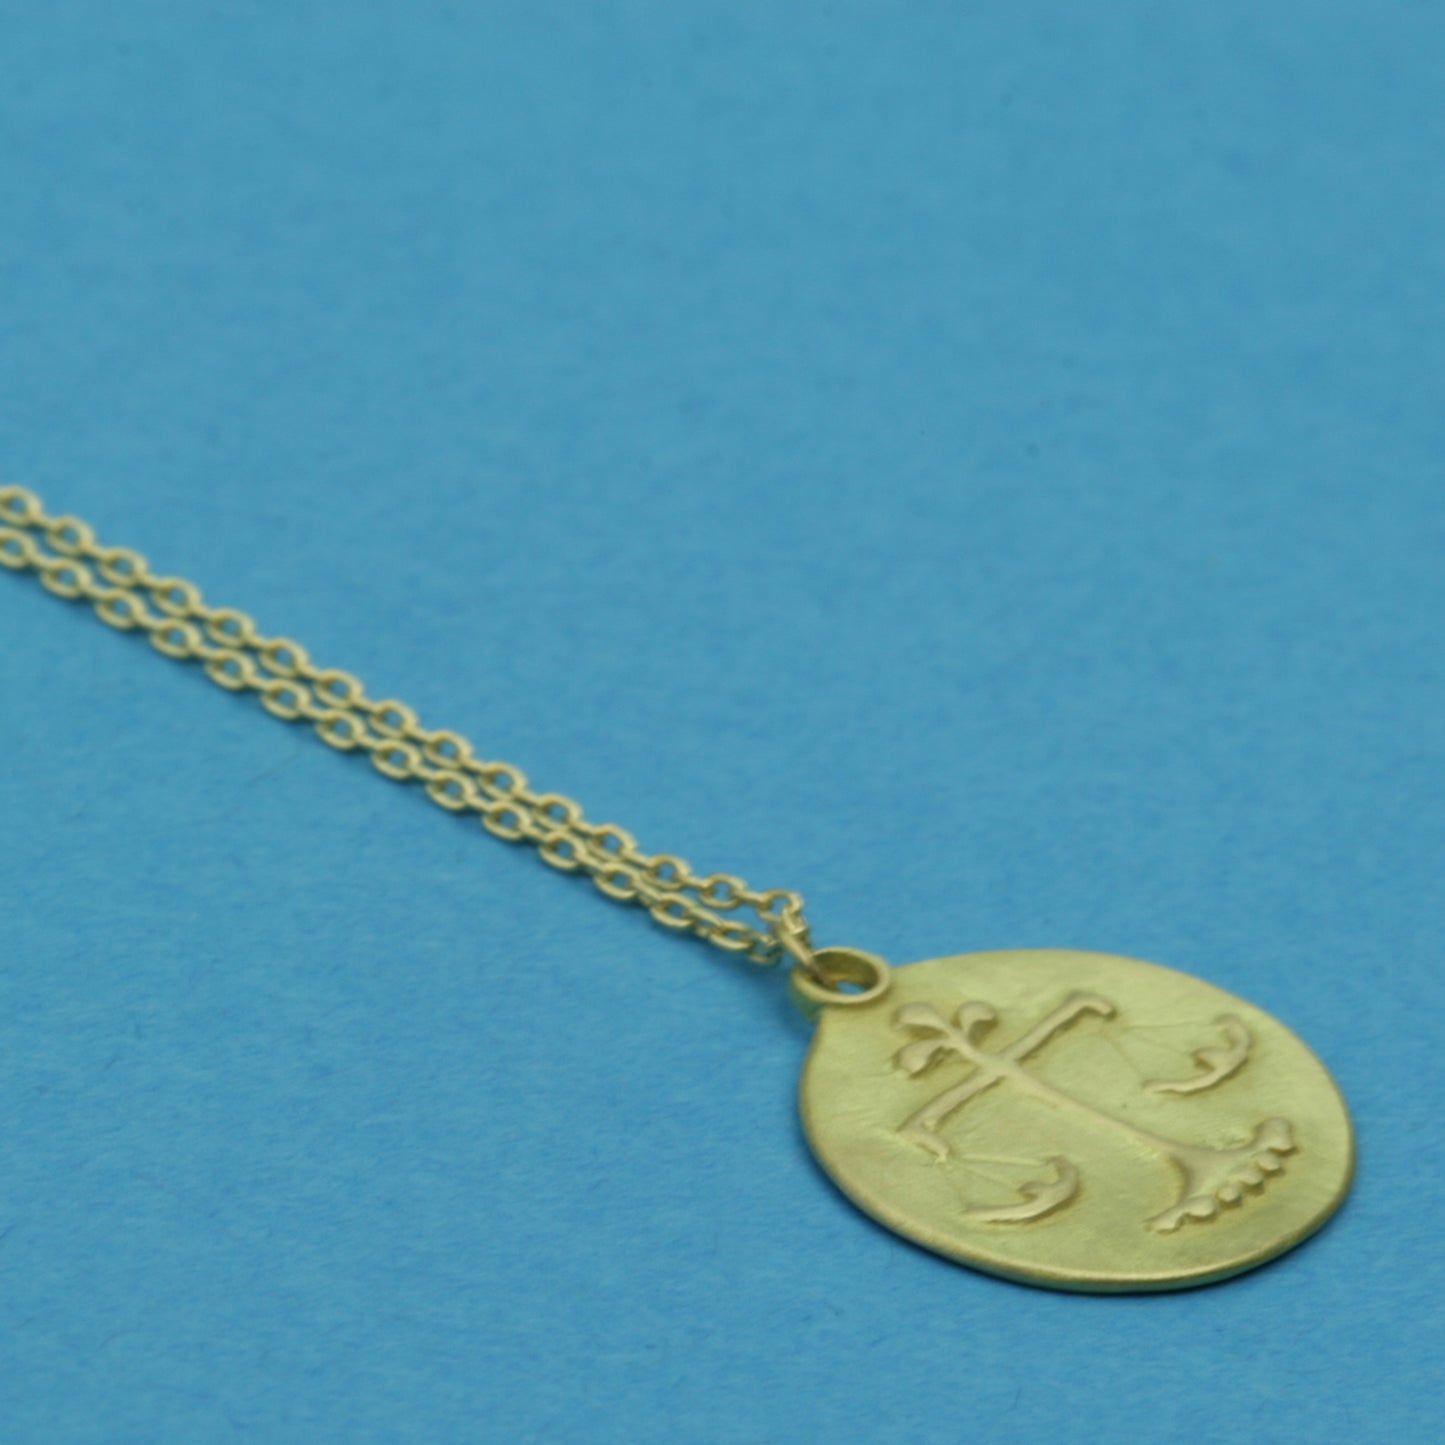 Libra Medal on cable chain, side view